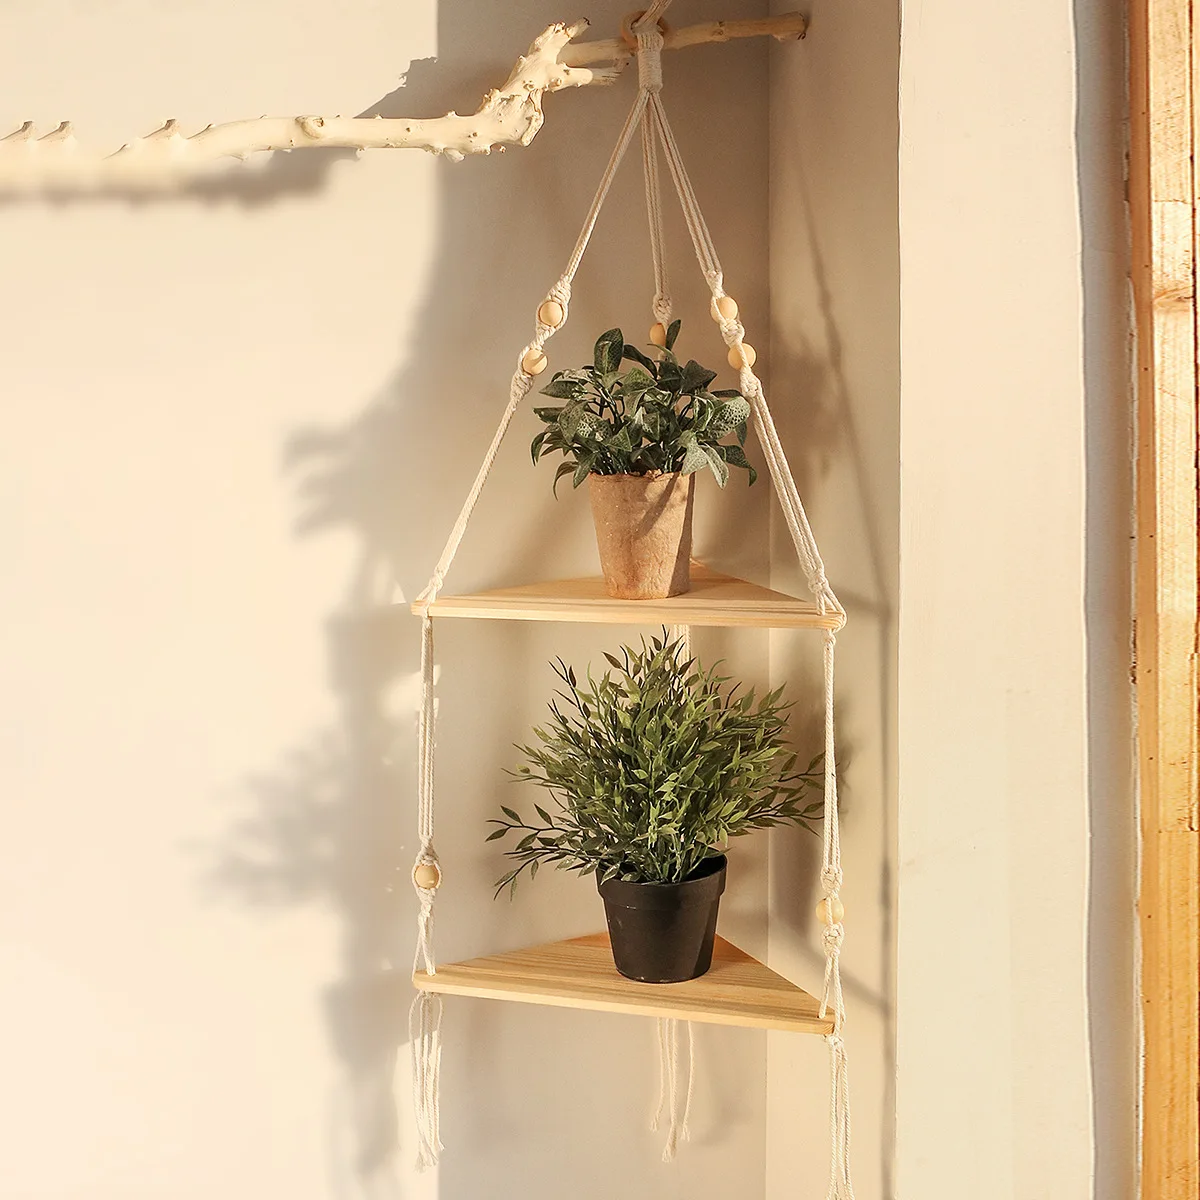 https://ae01.alicdn.com/kf/S834f99151bfd4224aba55490f53ada29n/Macrame-Hanging-Shelves-1-2-3-Tier-Plant-Shelf-for-Wall-Wood-Color-Woven-Rope-Floating.jpg